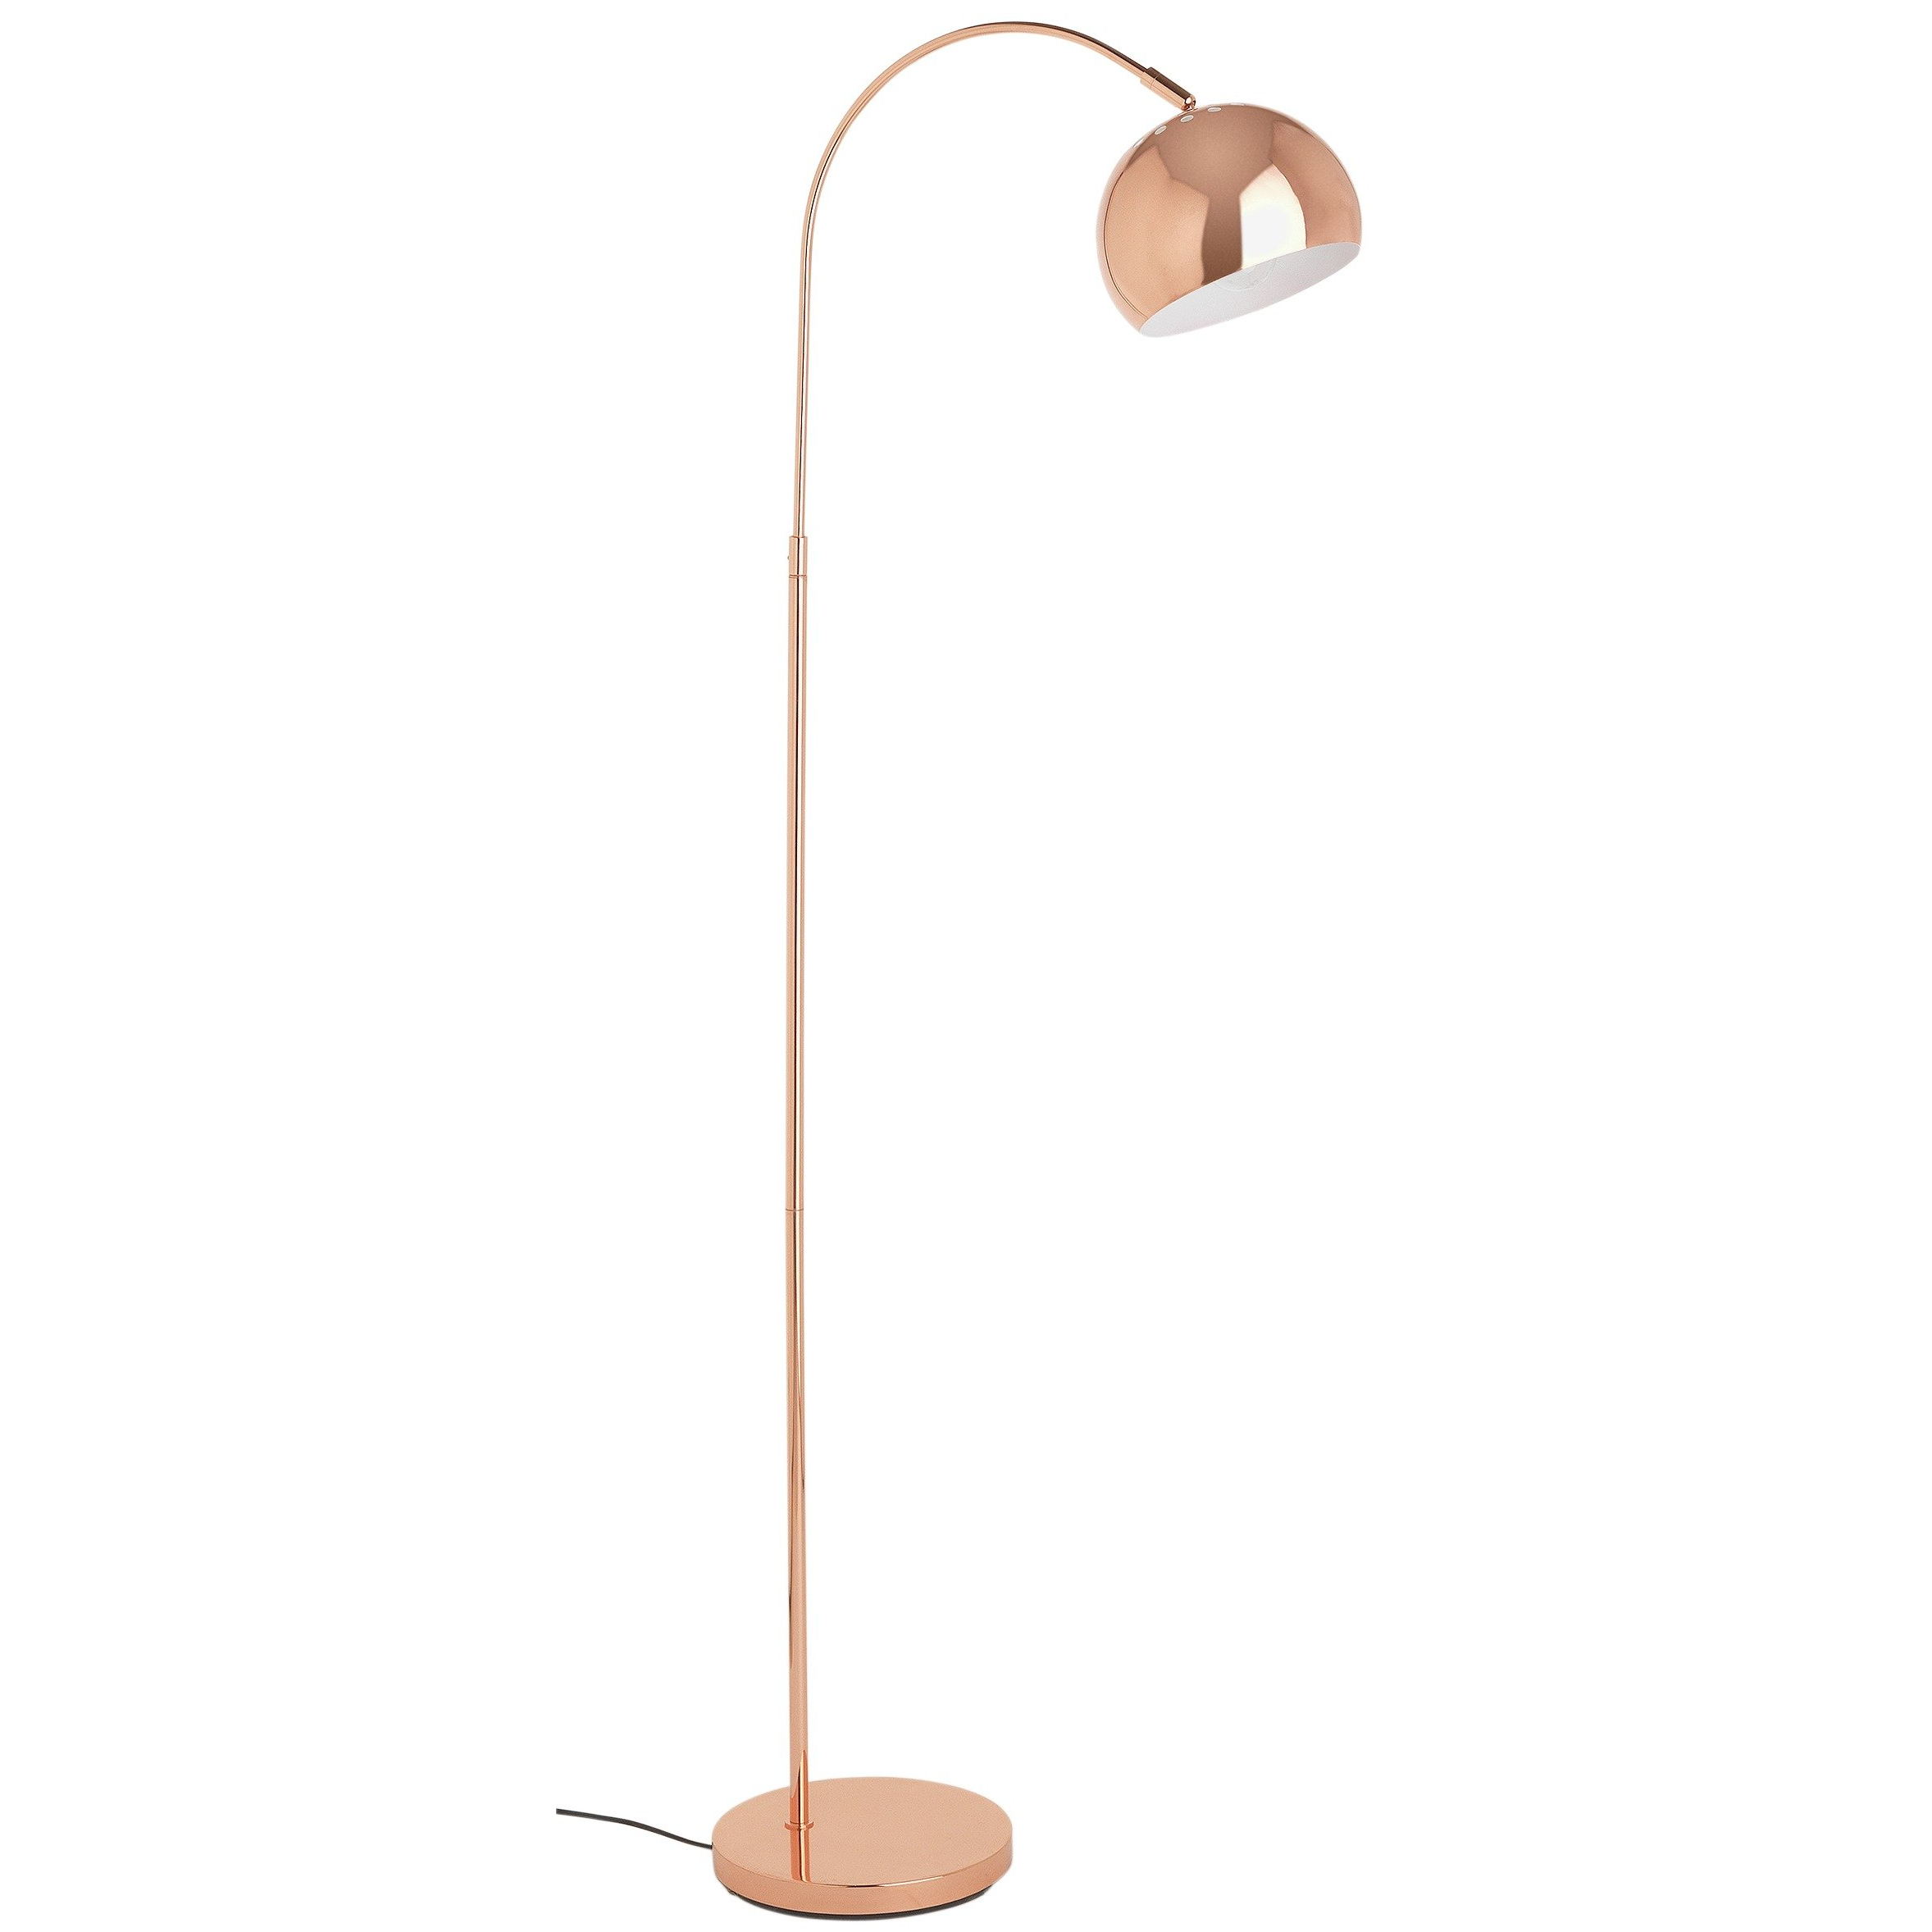 Home Curva Floor Lamp Copper Height 143cm Copper Floor intended for sizing 2356 X 2356